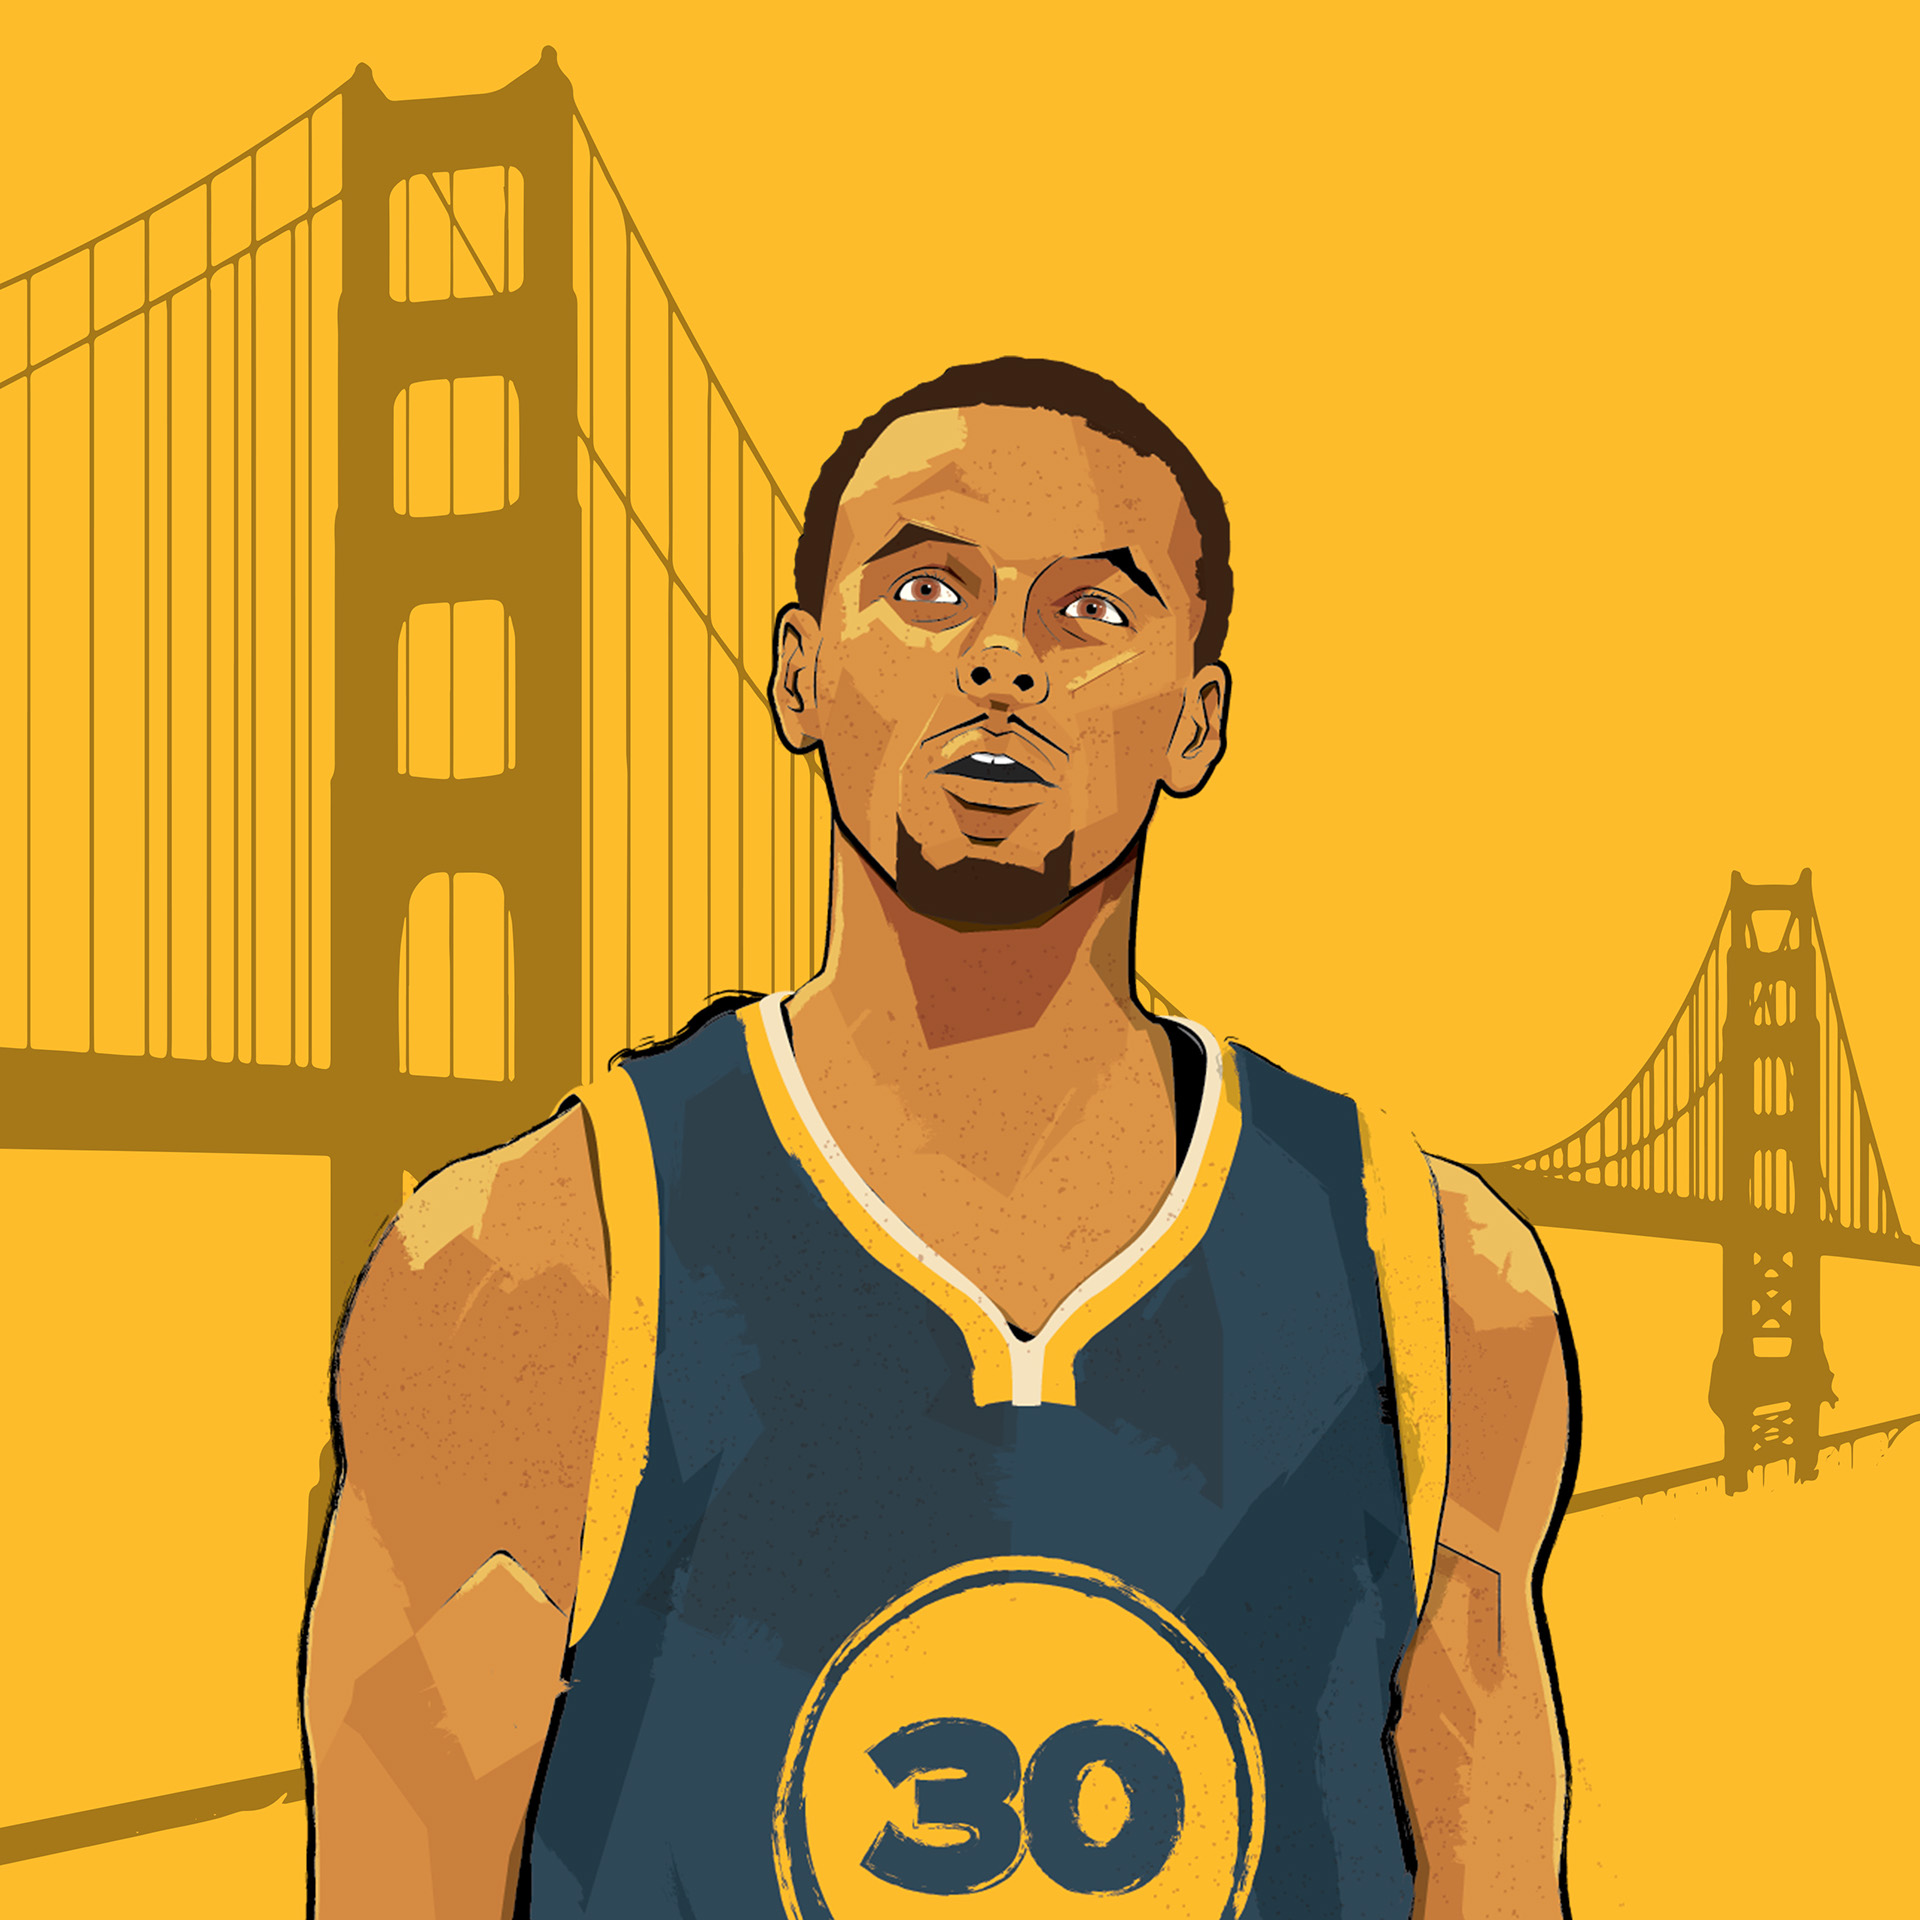 Steph Curry Infographic on Behance